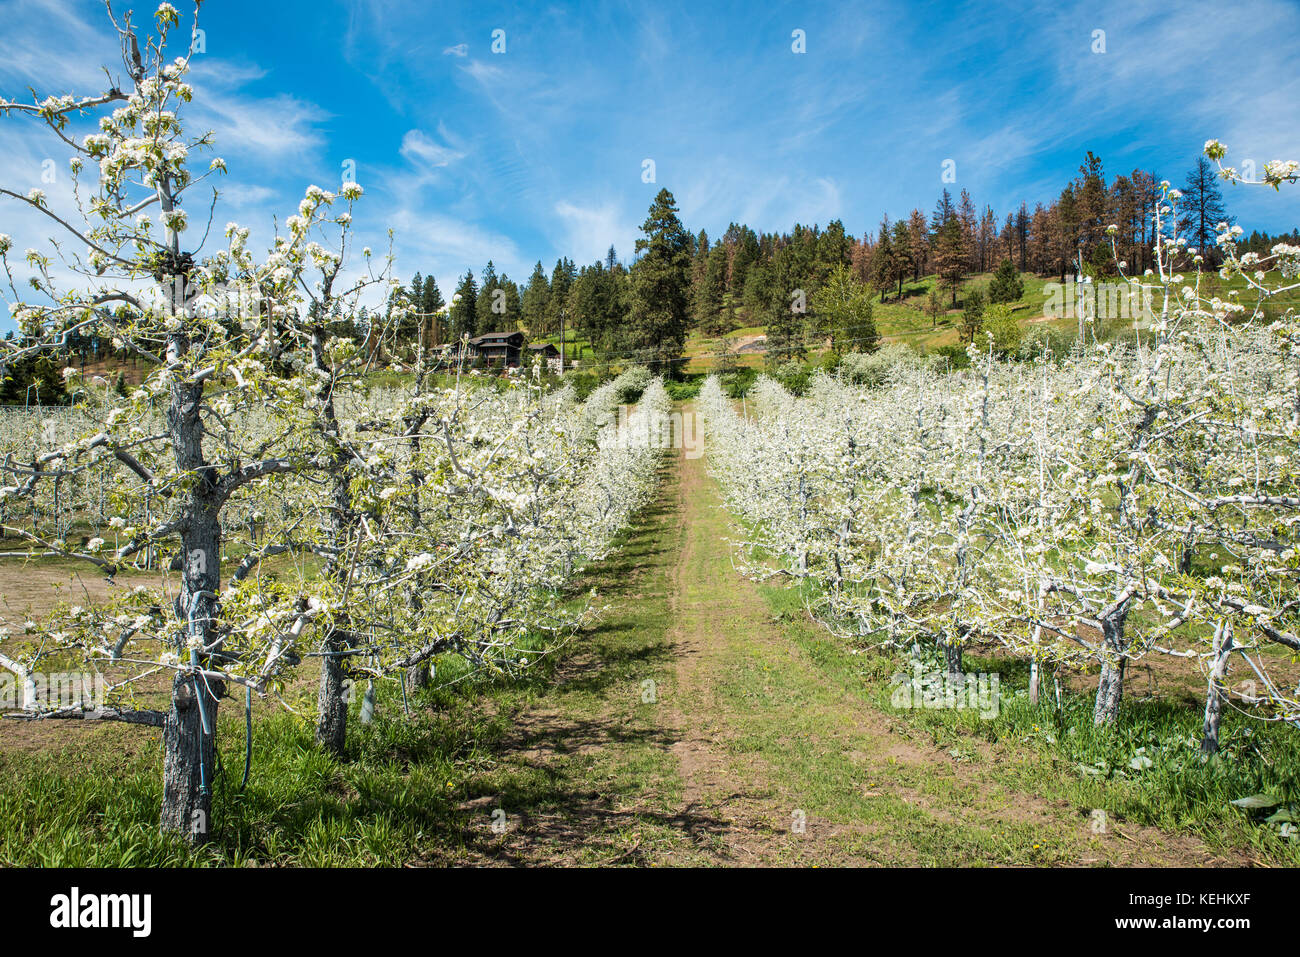 Apple Orchard Climbing a Hill - An apple orchard near Leavenworth, Washington, blooms in early May, lovely white blossoms decorating each branch. Stock Photo